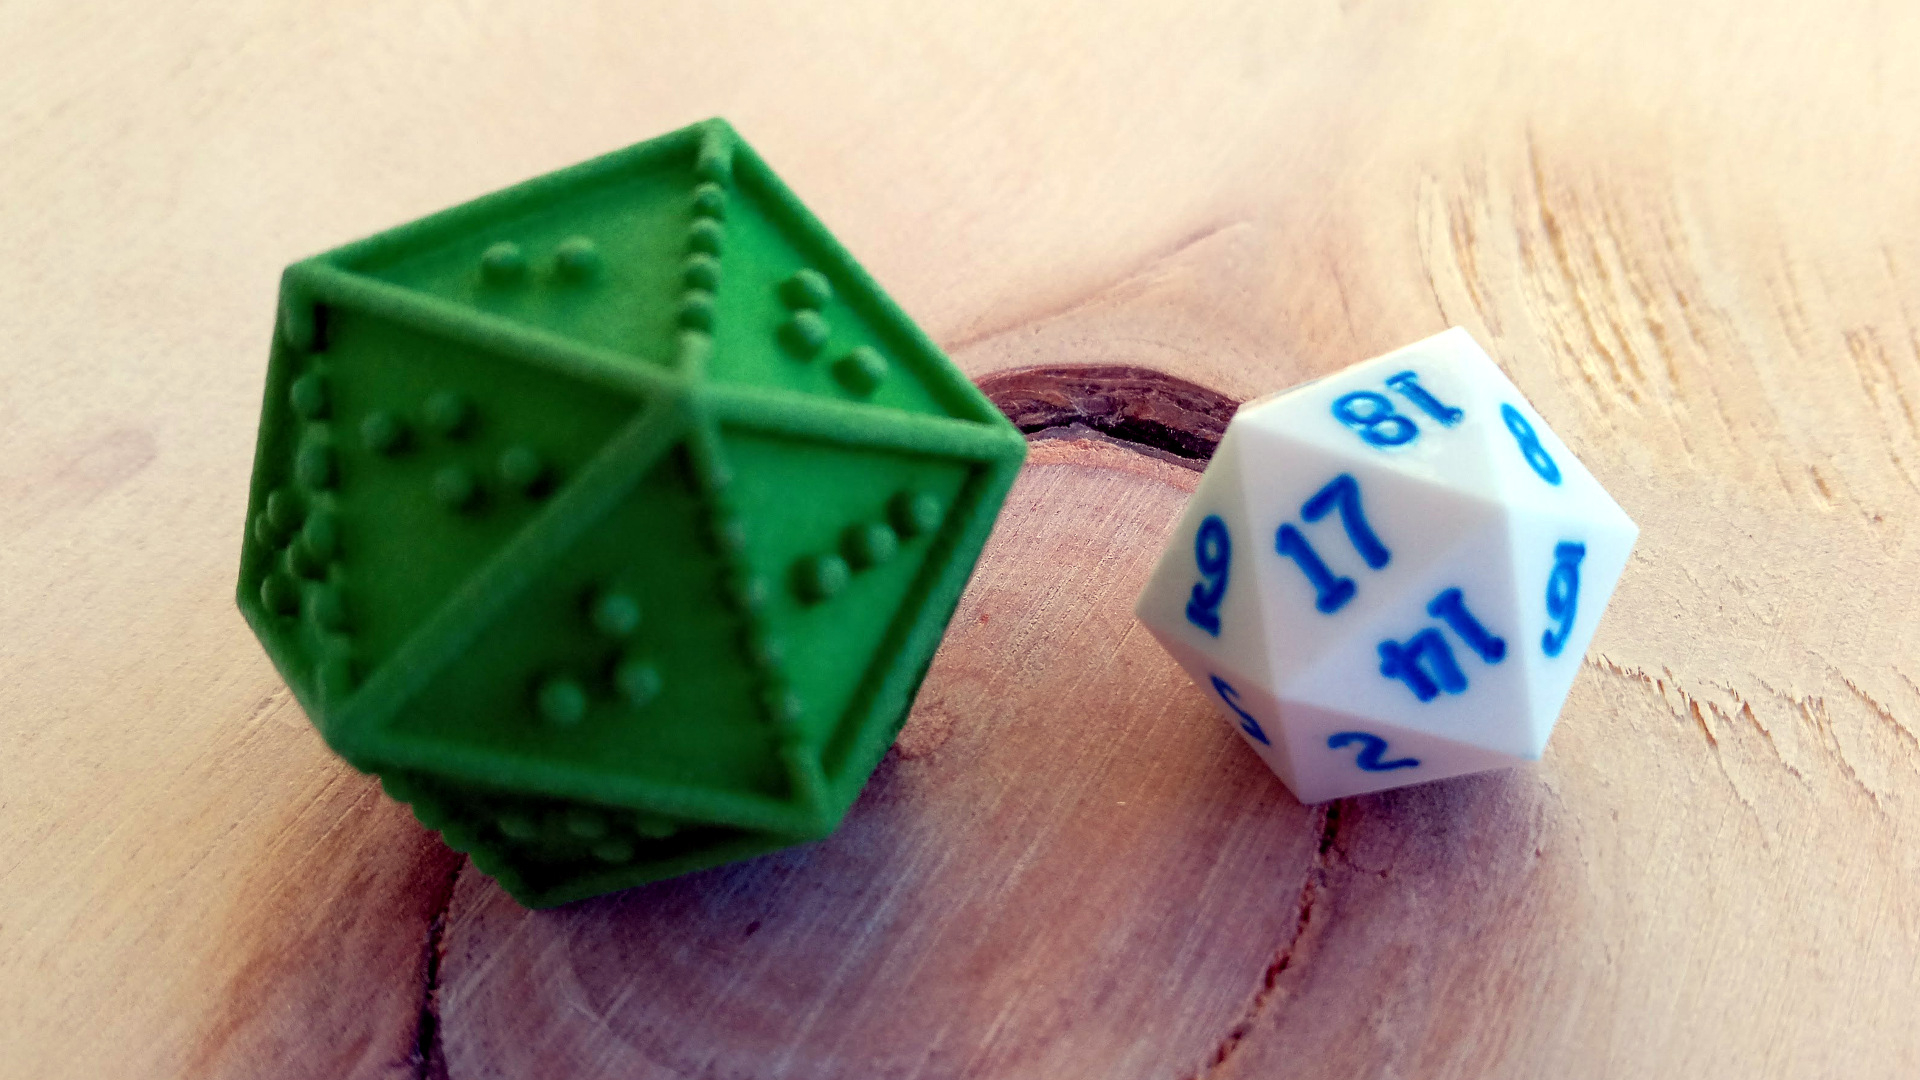 1920x1080 Helping the Visually Impaired with DOTS RPG Dice | All3DP